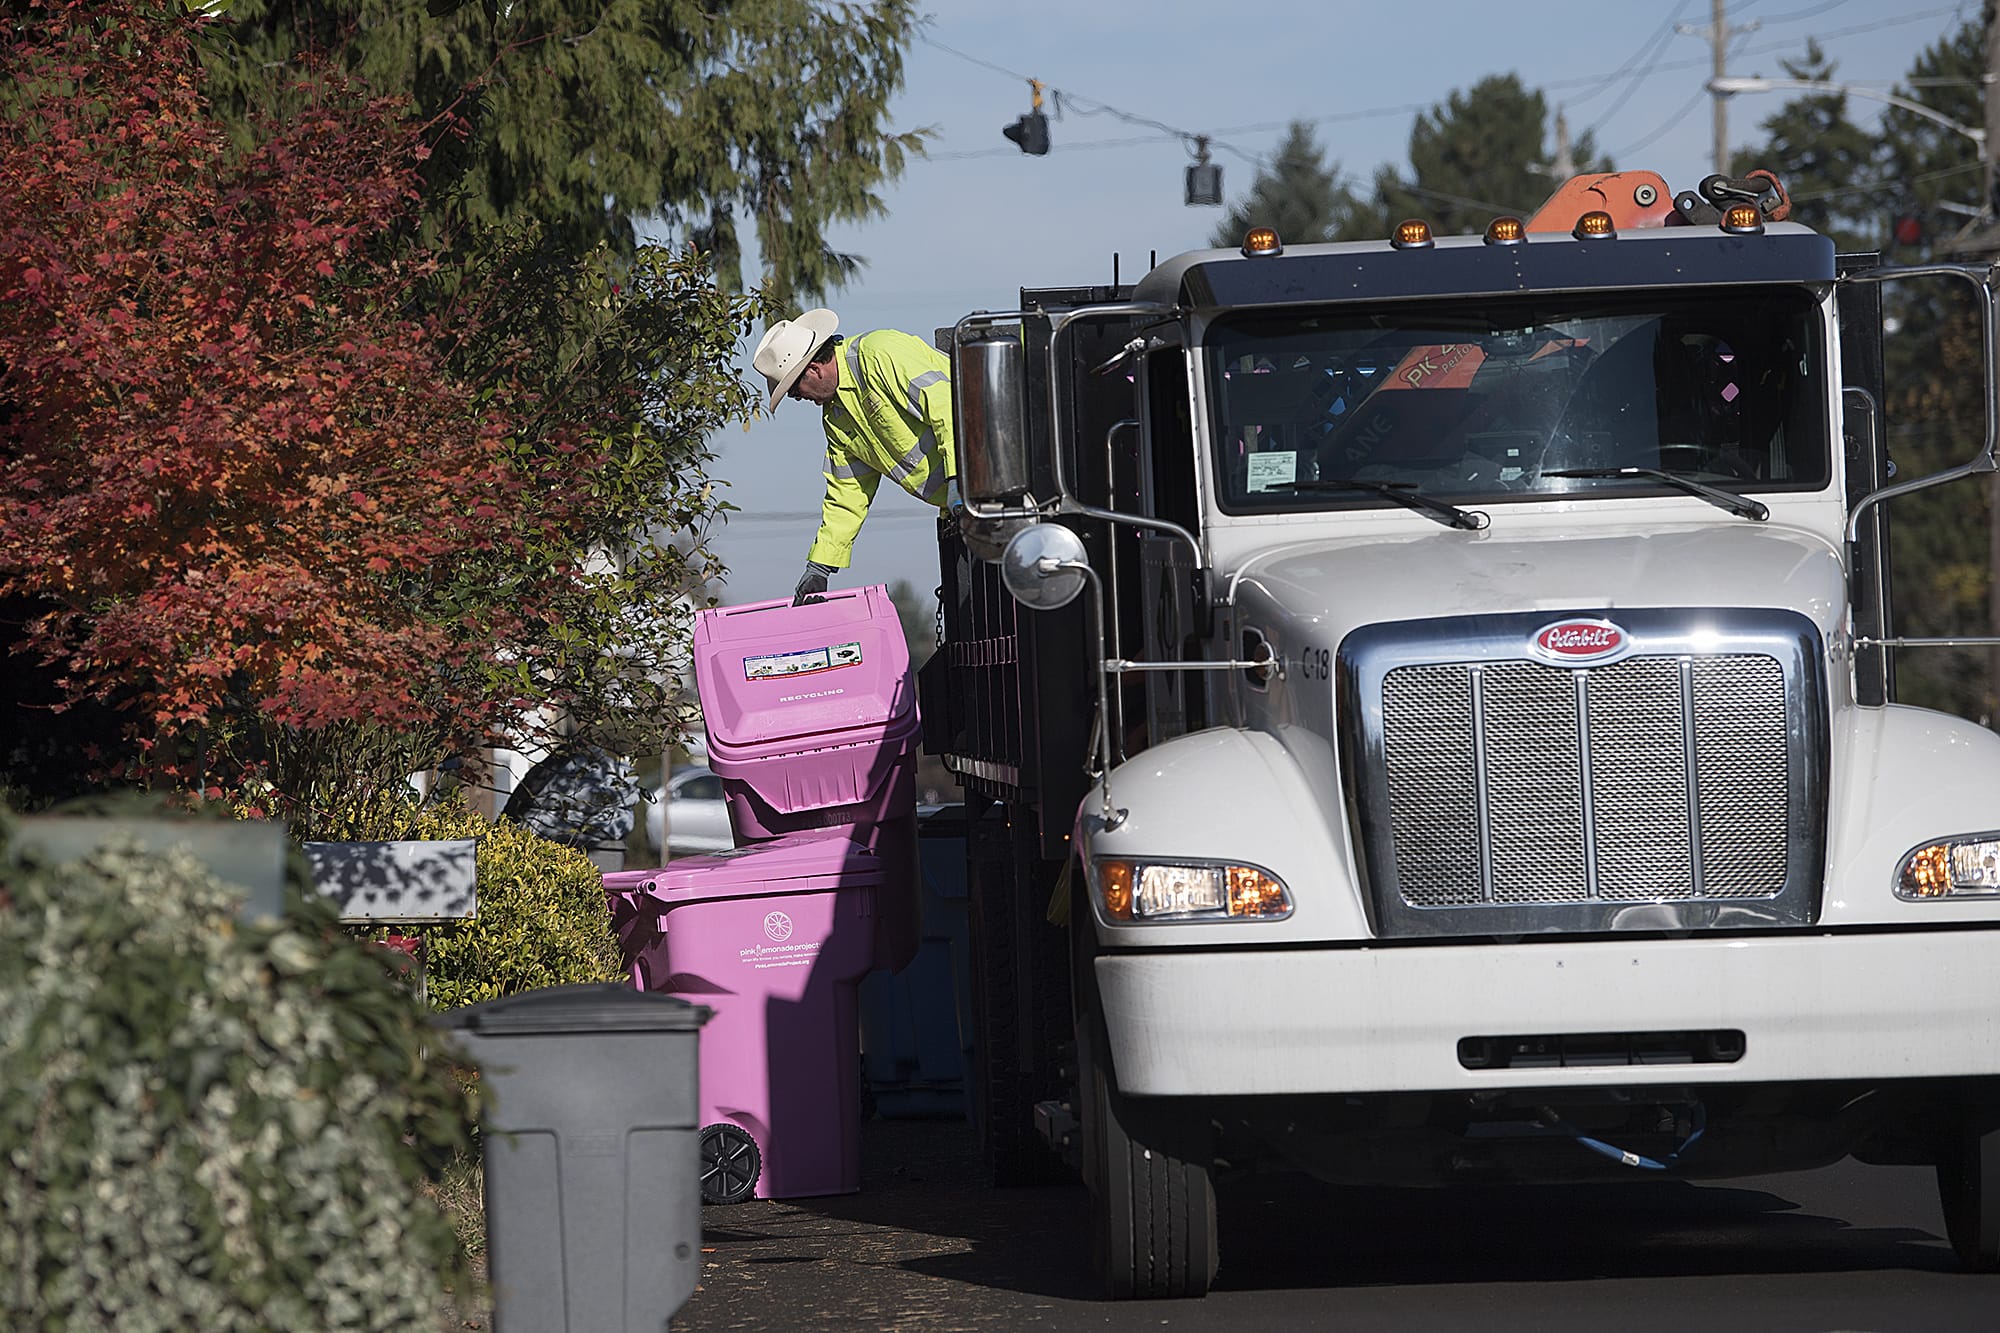 Ben Dynes, a driver with Waste Connections, drops off a pink recycle bin in honor of breast cancer awareness at a home along Devine Road on Wednesday morning, Nov. 6, 2019.